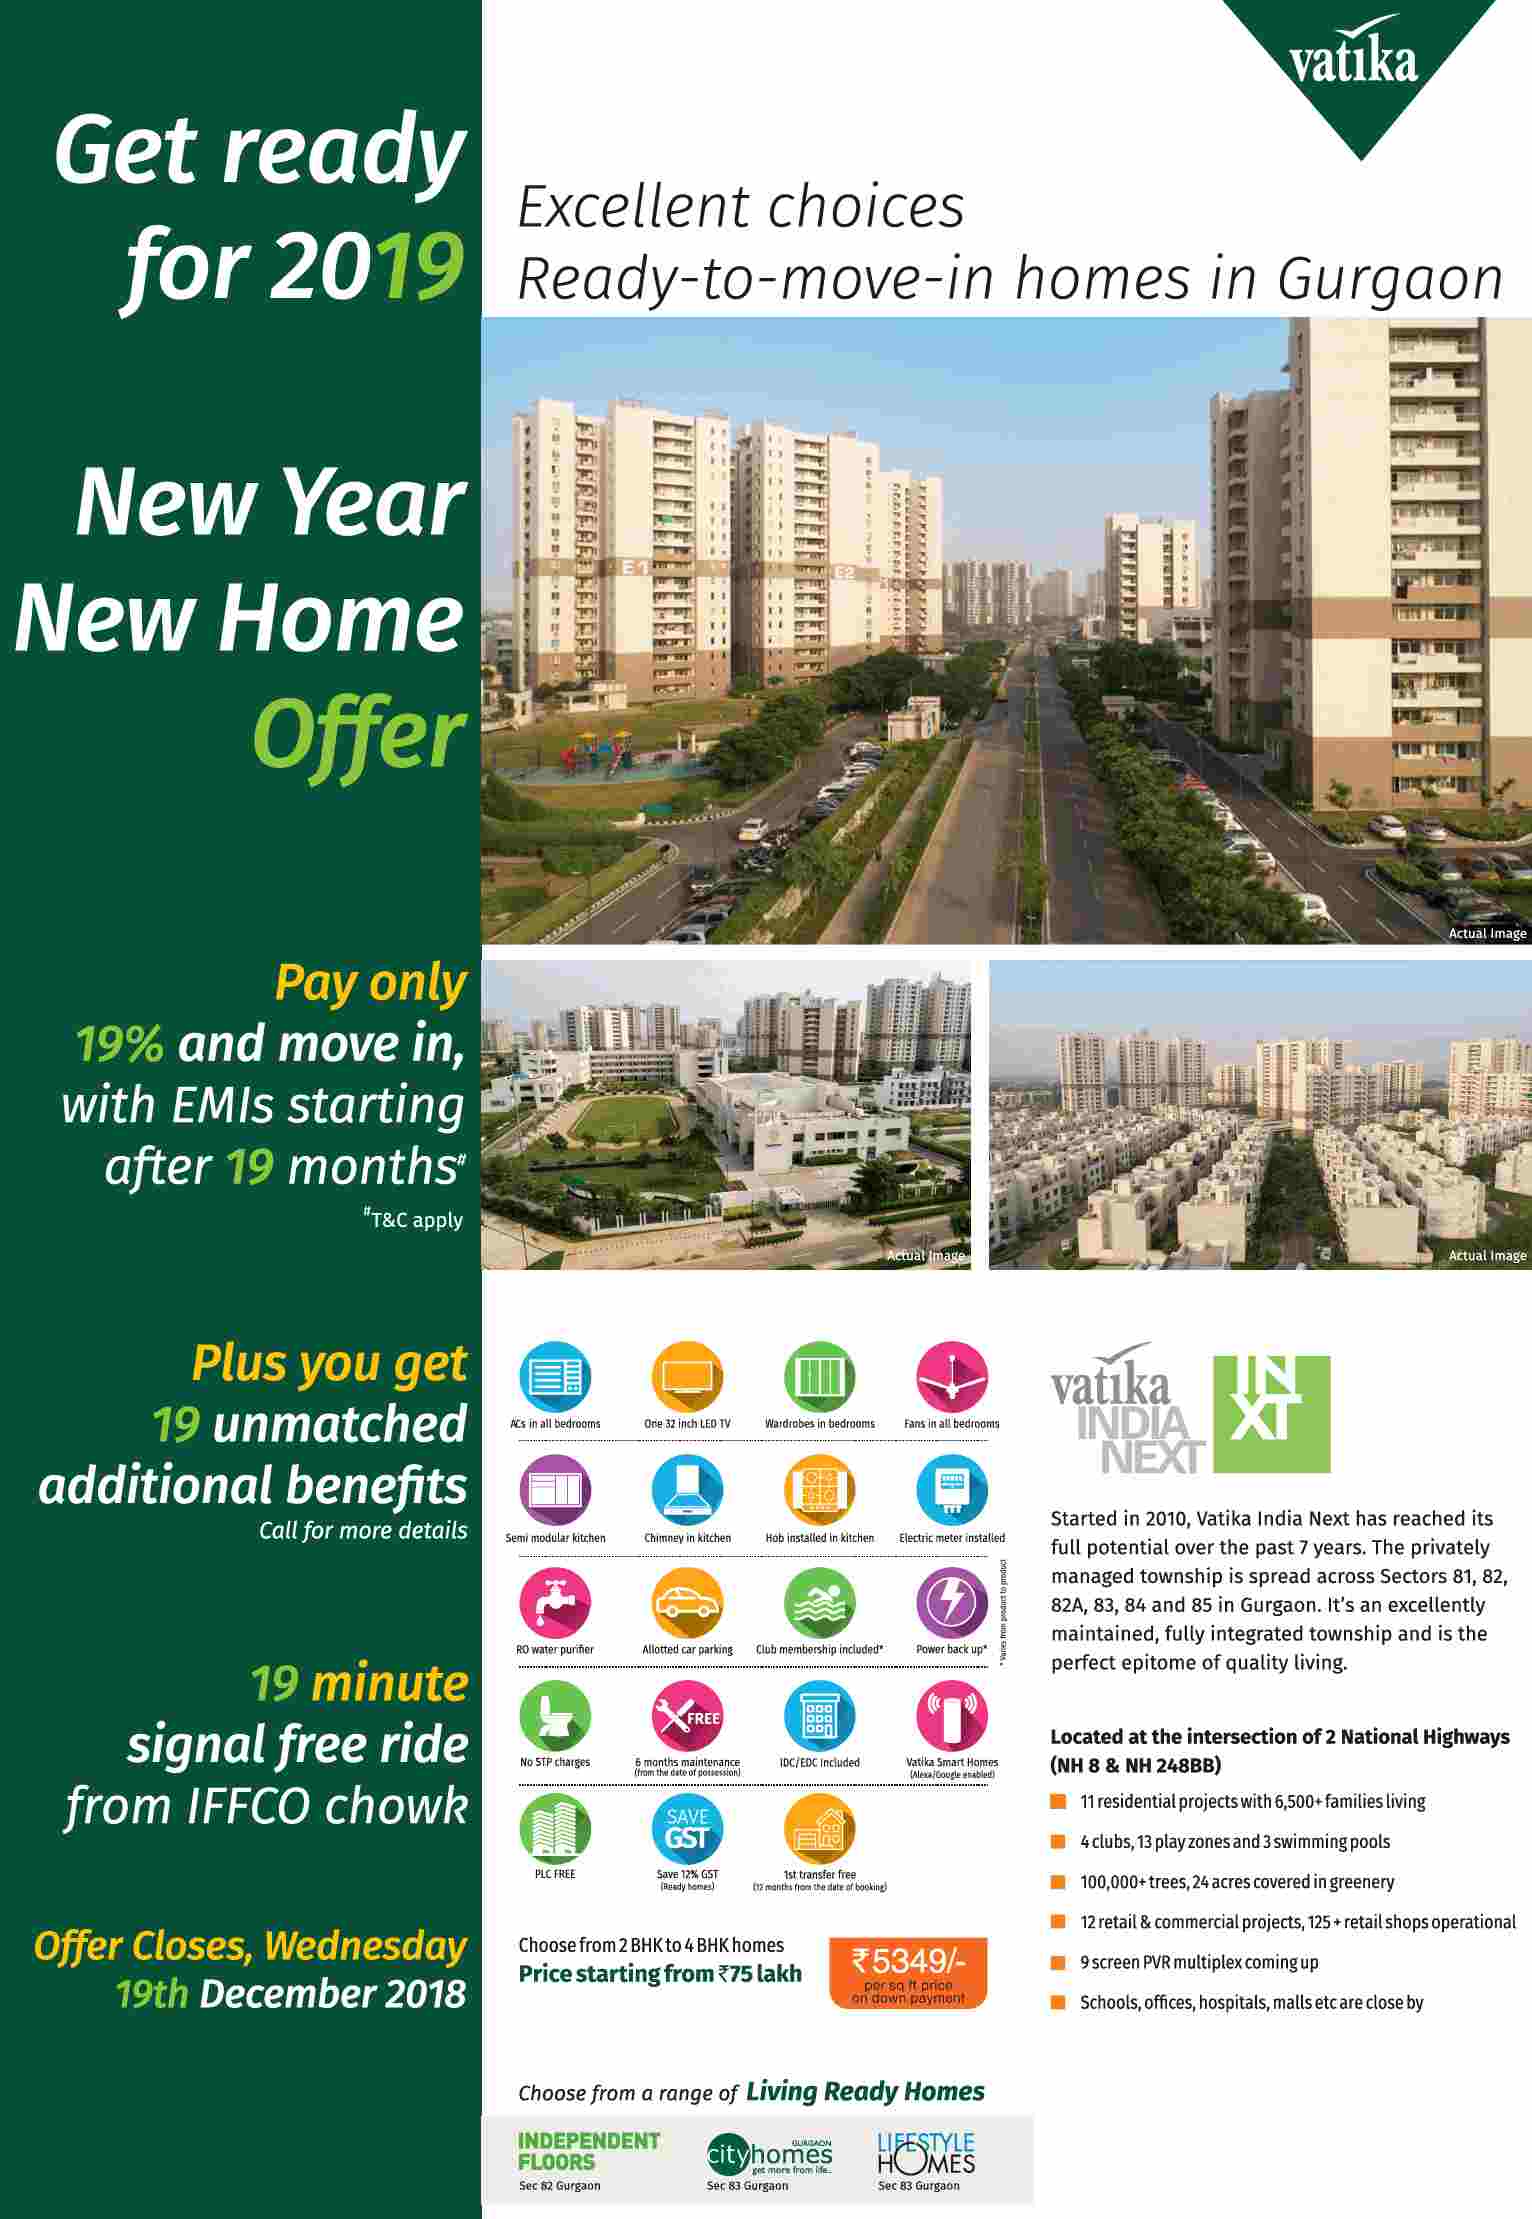 Choose from a range of living ready homes by Vatika in Gurgaon Update